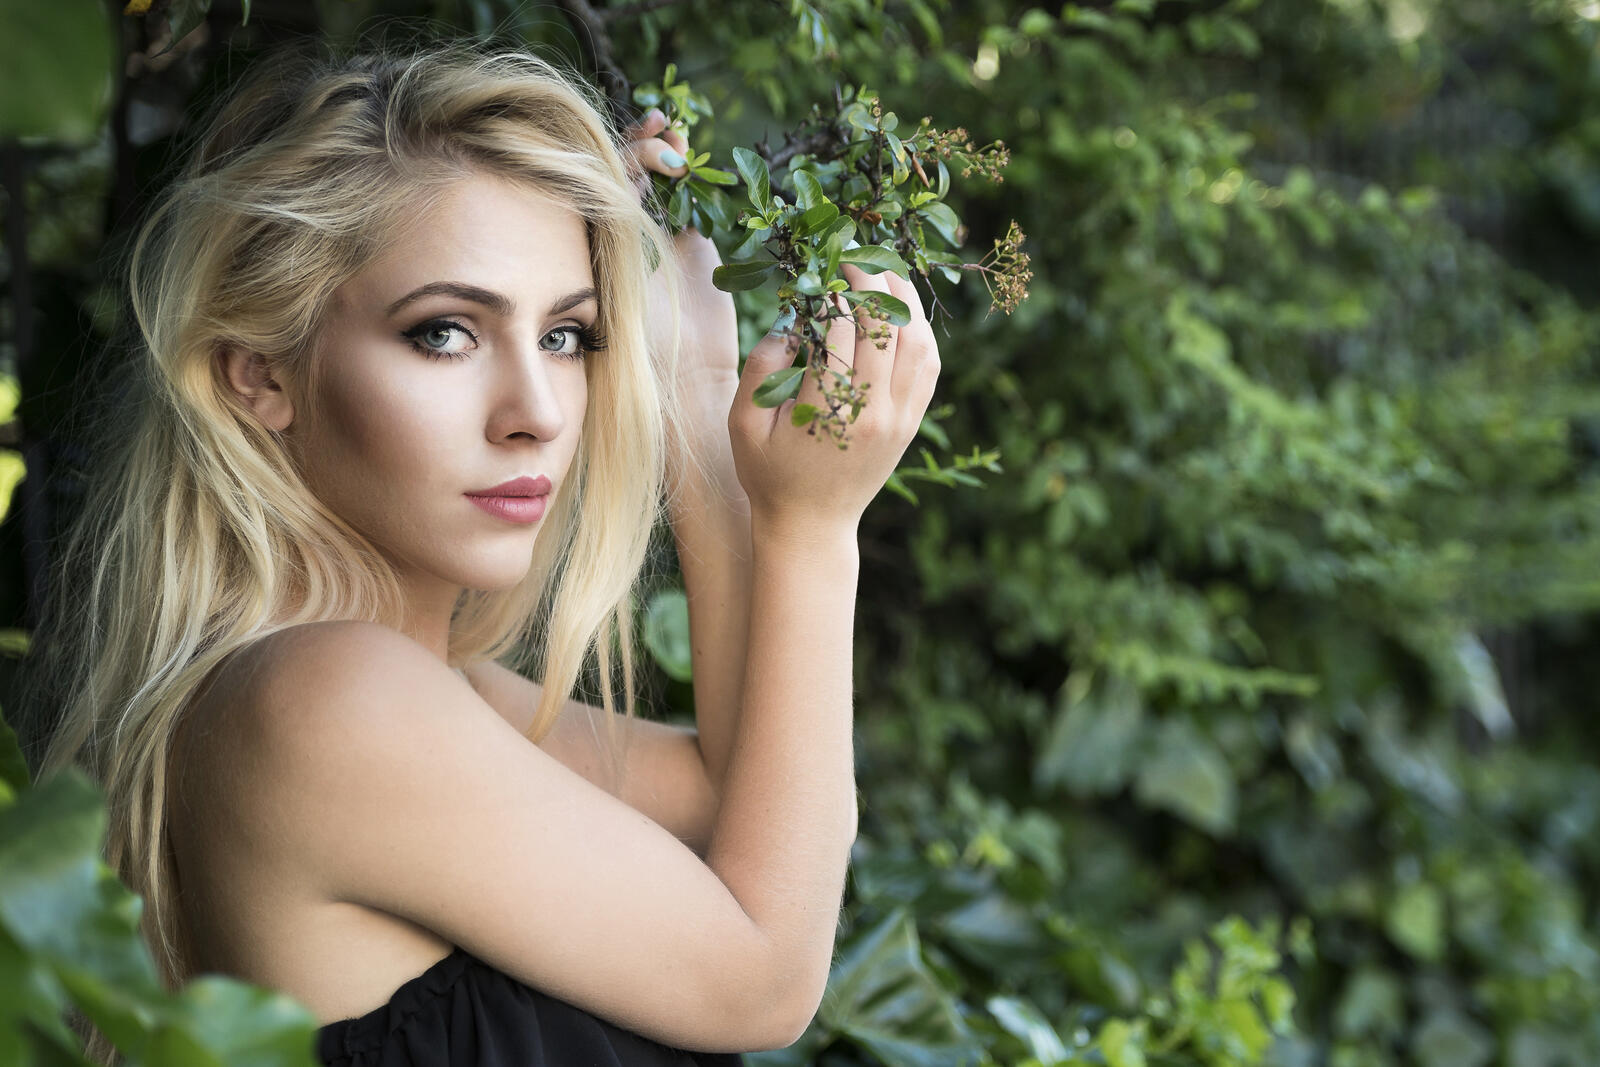 Free photo A blonde girl poses with a flower